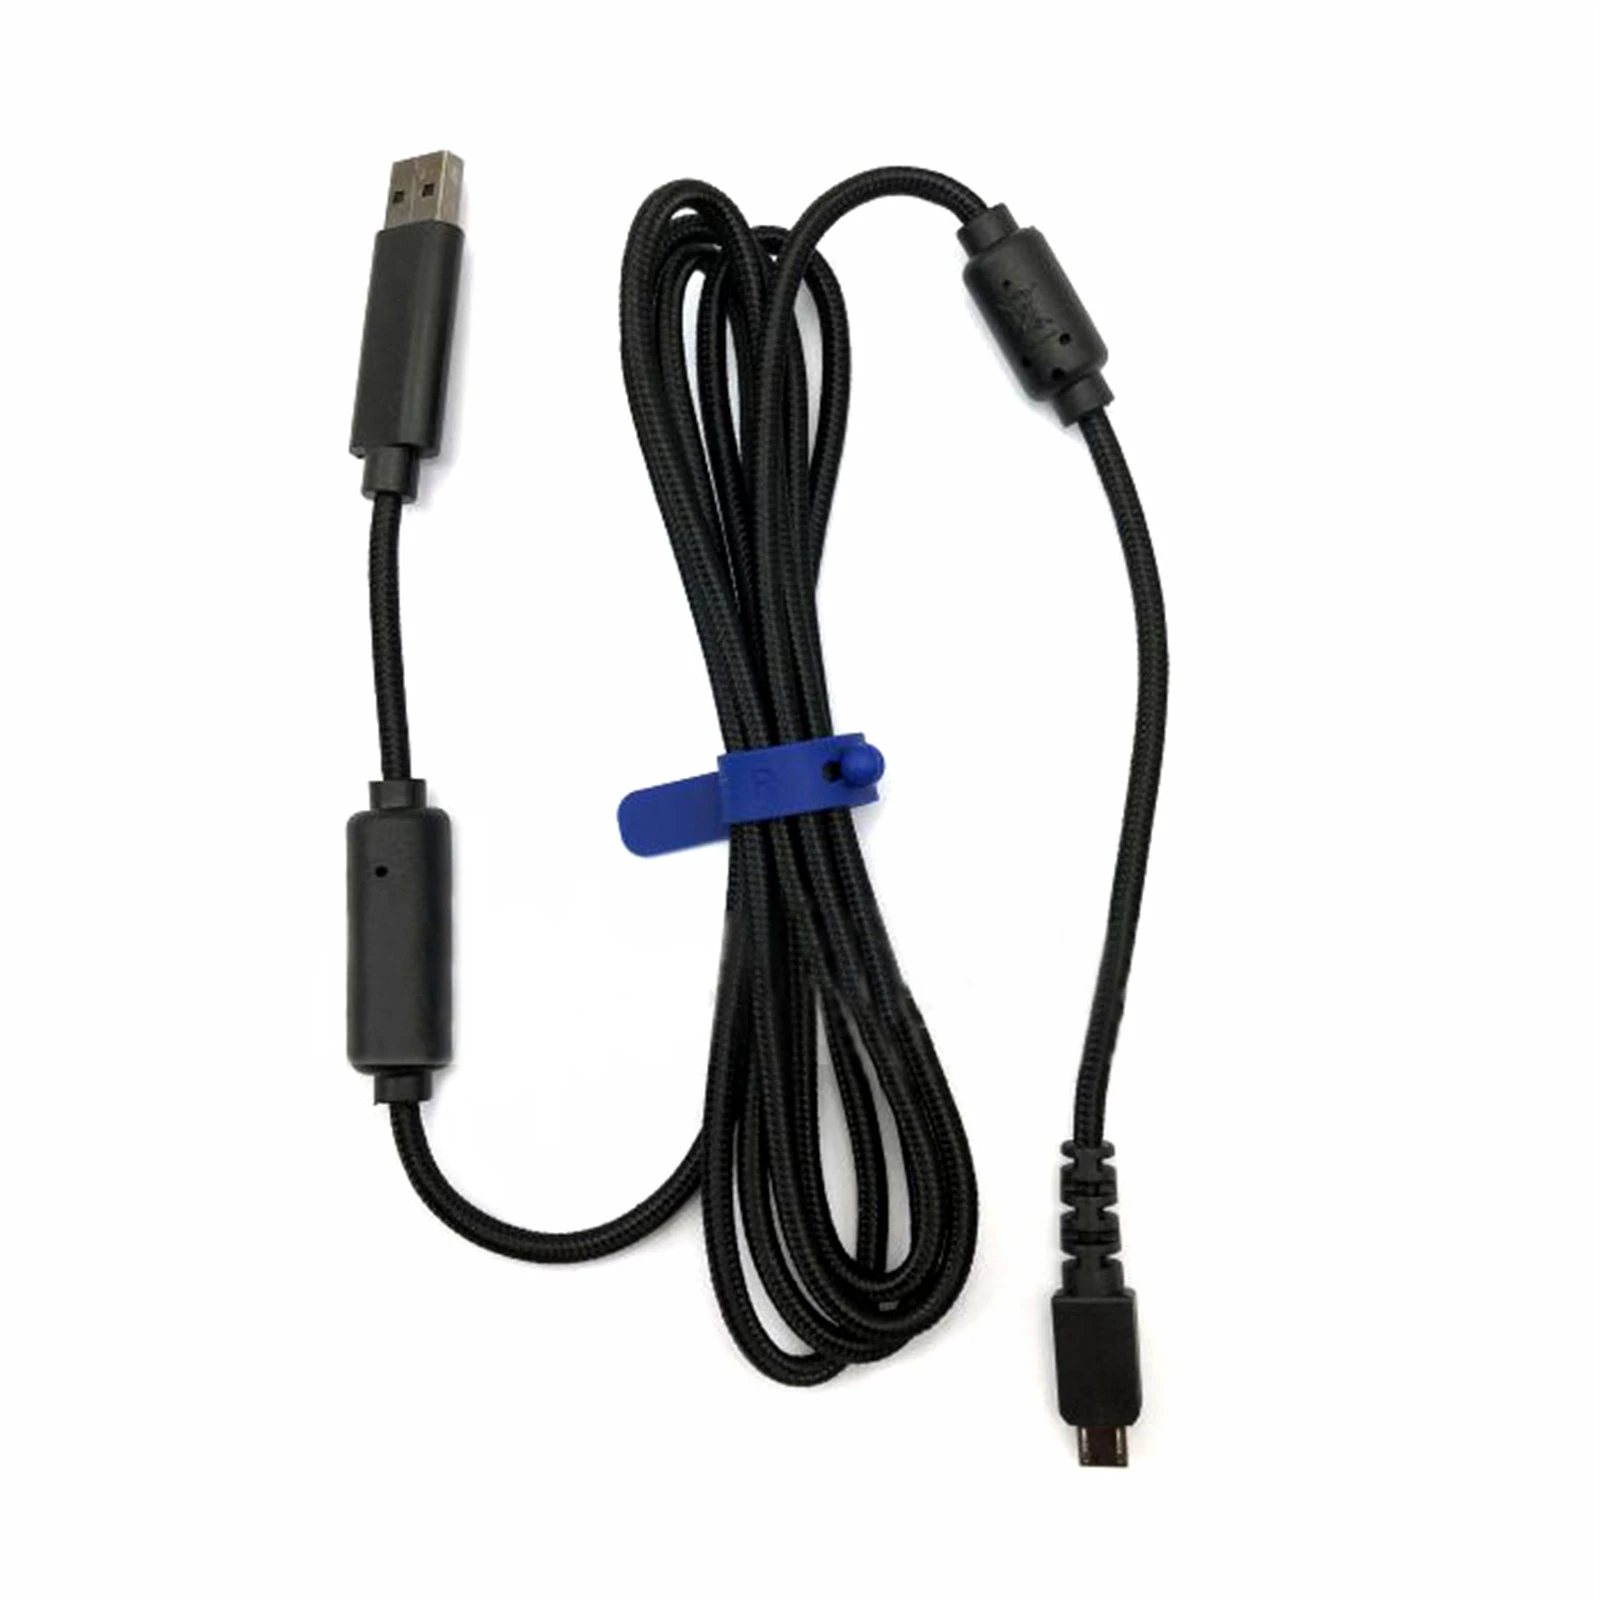 Afskrække radikal høste Controller Connect Cable 2m Usb Data Cable For Razer Raiju Ergonomic For  Ps4 Gamepad For Xbox One Game Console Accessories - Accessories - AliExpress